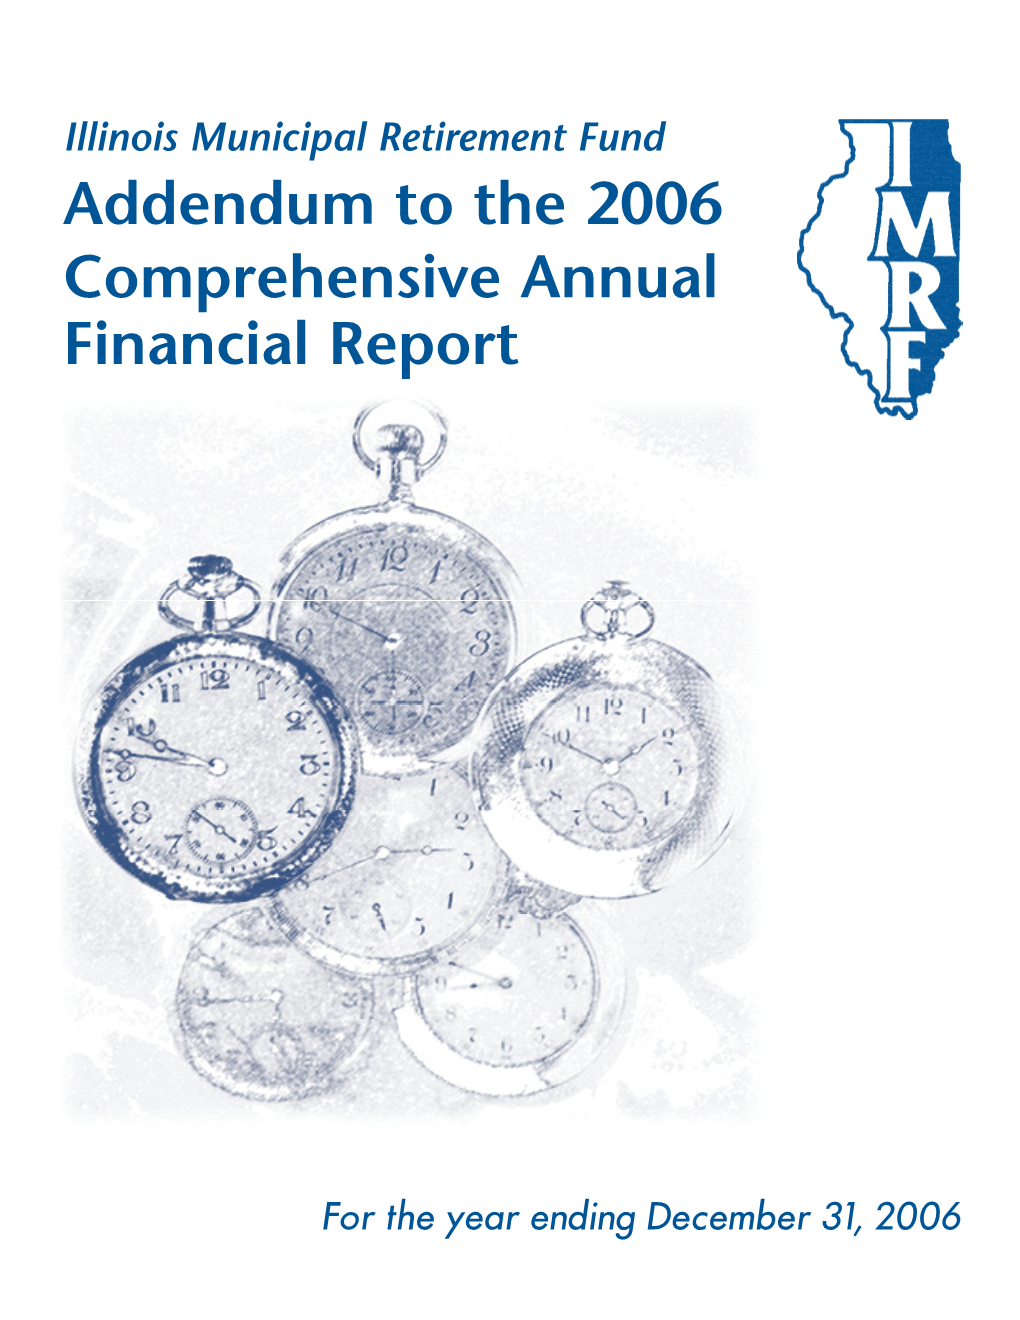 2006 IMRF Addendum to the Comprehensive Annual Financial